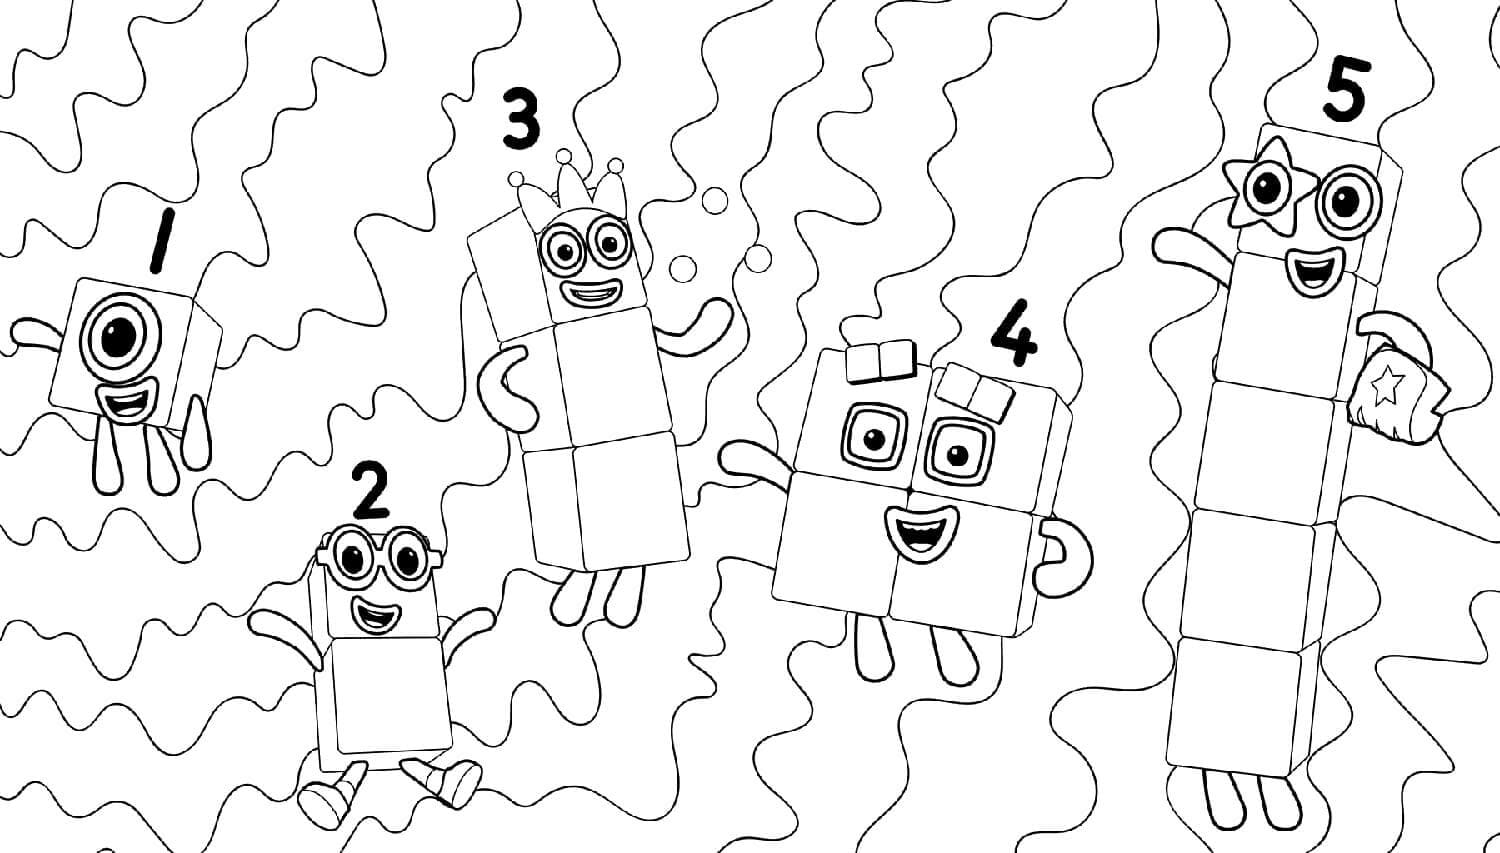 Funny numberblocks coloring page